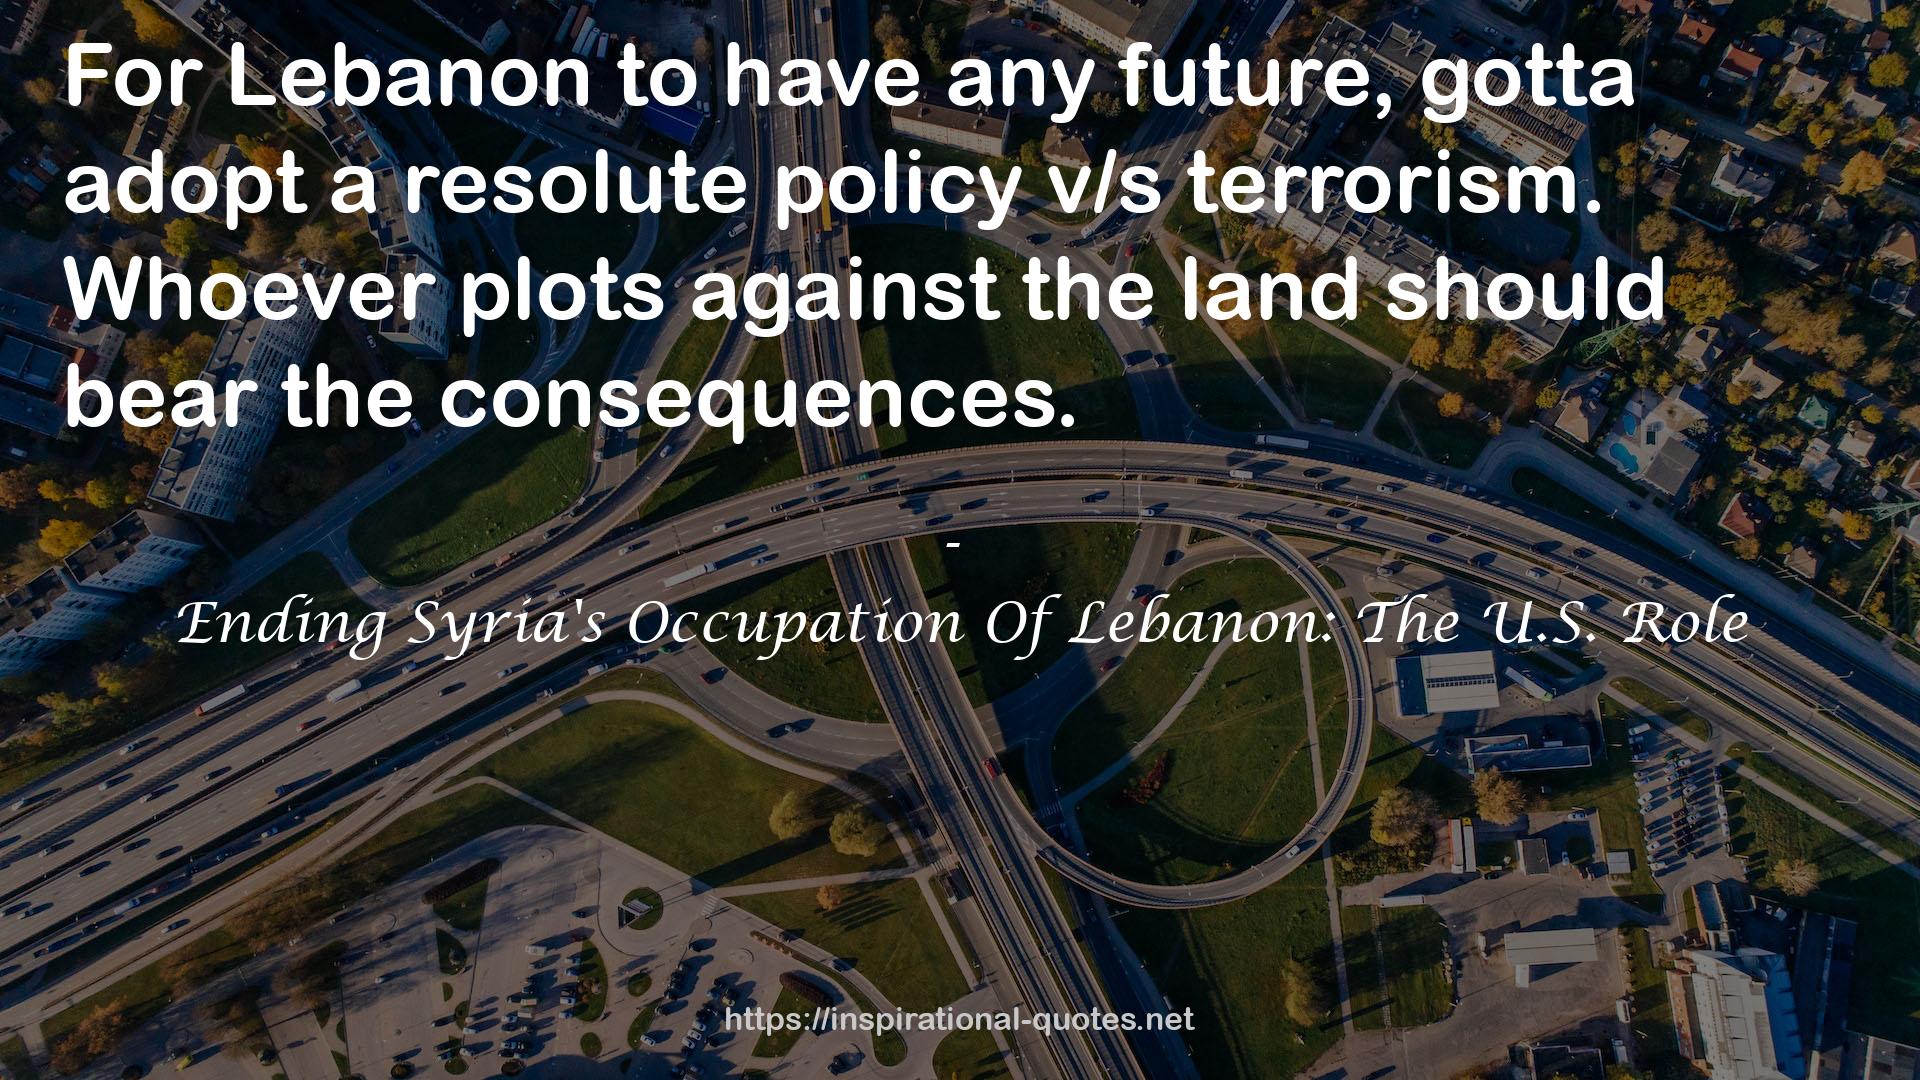 Ending Syria's Occupation Of Lebanon: The U.S. Role QUOTES